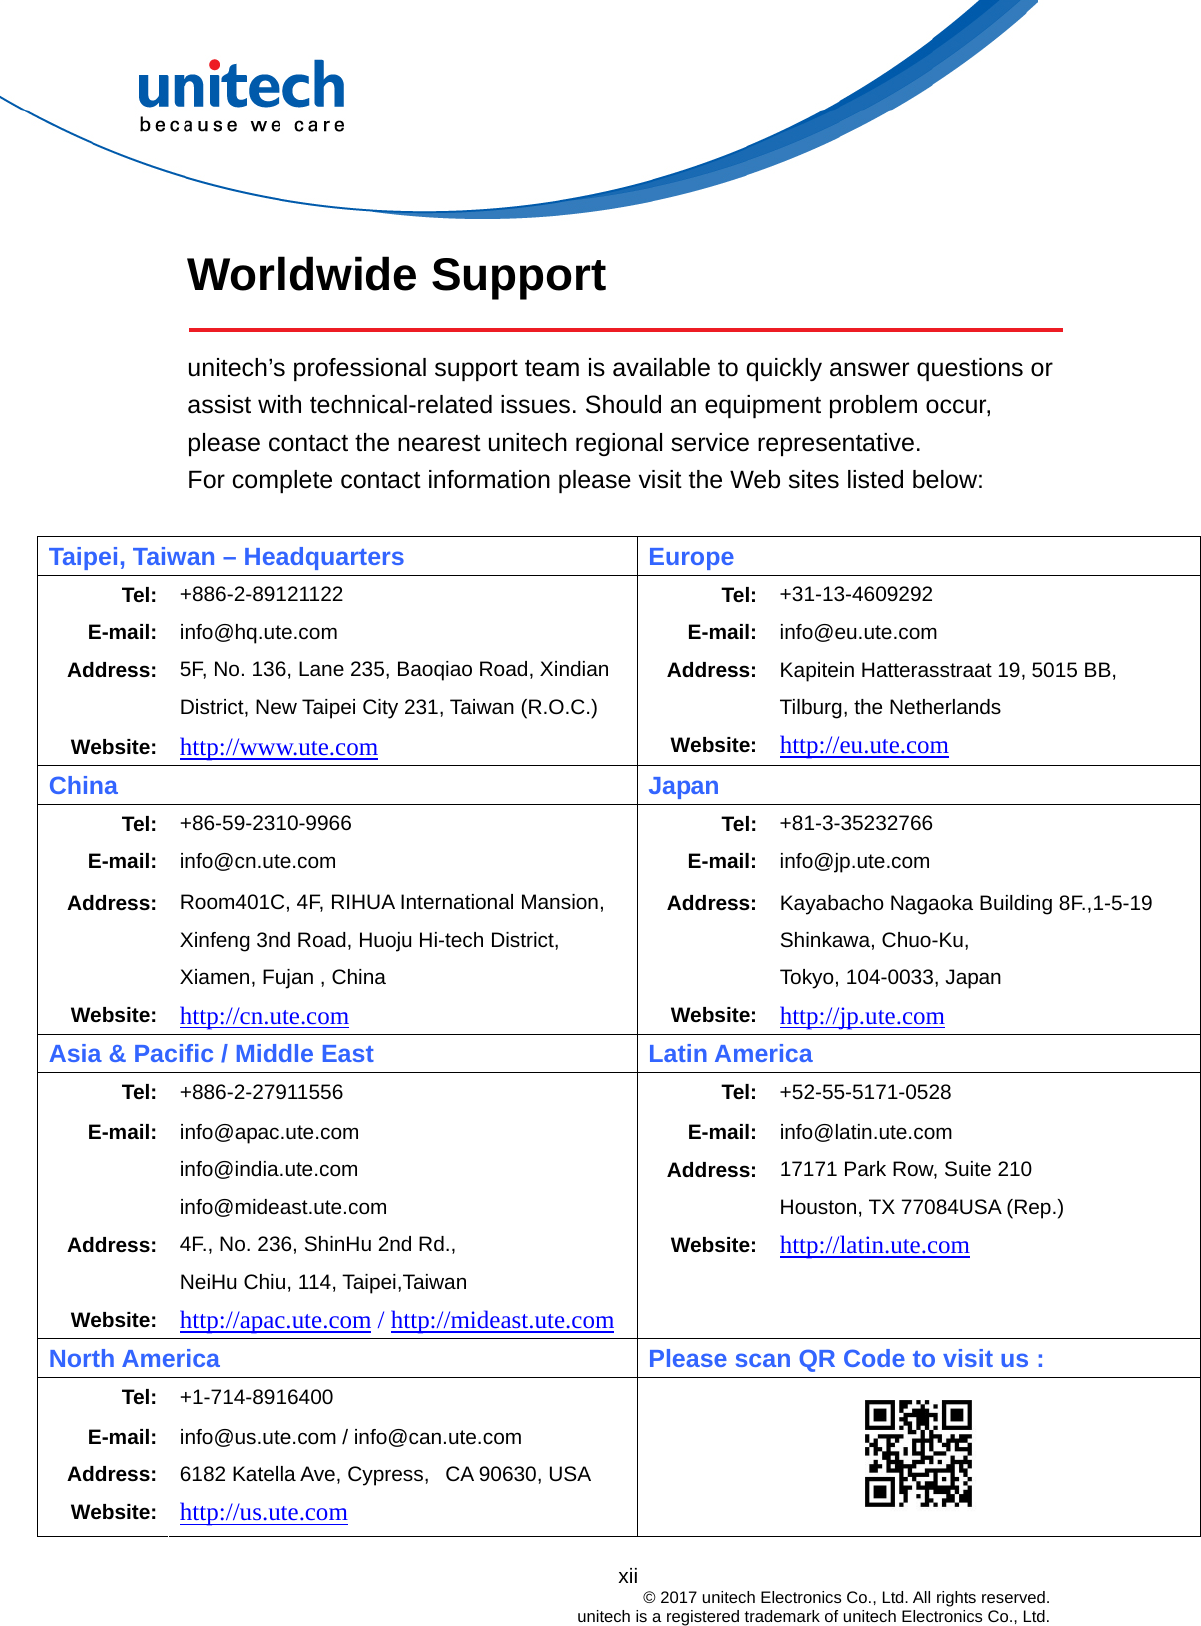  Worldwide Support    unitech’s professional support team is available to quickly answer questions or assist with technical-related issues. Should an equipment problem occur, please contact the nearest unitech regional service representative.   For complete contact information please visit the Web sites listed below:  Taipei, Taiwan – Headquarters Europe Tel: +886-2-89121122  Tel: +31-13-4609292 E-mail: info@hq.ute.com  E-mail: info@eu.ute.com Address: 5F, No. 136, Lane 235, Baoqiao Road, Xindian District, New Taipei City 231, Taiwan (R.O.C.) Address: Kapitein Hatterasstraat 19, 5015 BB, Tilburg, the Netherlands xii                                         © 2017 unitech Electronics Co., Ltd. All rights reserved.                                             unitech is a registered trademark of unitech Electronics Co., Ltd.  Website: http://www.ute.com Website: http://eu.ute.com China   Japan Tel: +86-59-2310-9966 Tel: +81-3-35232766 E-mail: info@cn.ute.com  E-mail: info@jp.ute.com Address:   Website: Room401C, 4F, RIHUA International Mansion, Xinfeng 3nd Road, Huoju Hi-tech District, Xiamen, Fujan , China http://cn.ute.com Address:Website:Kayabacho Nagaoka Building 8F.,1-5-19 Shinkawa, Chuo-Ku,   Tokyo, 104-0033, Japan http://jp.ute.com Asia &amp; Pacific / Middle East Latin America Tel:  +886-2-27911556  Tel: +52-55-5171-0528 E-mail:  info@apac.ute.com info@india.ute.com info@mideast.ute.com E-mail:Address:info@latin.ute.com 17171 Park Row, Suite 210   Houston, TX 77084USA (Rep.) Address:  4F., No. 236, ShinHu 2nd Rd., NeiHu Chiu, 114, Taipei,Taiwan Website: http://latin.ute.com Website: http://apac.ute.com / http://mideast.ute.com  North America Please scan QR Code to visit us : Tel: +1-714-8916400 E-mail: Address: Website: info@us.ute.com / info@can.ute.com 6182 Katella Ave, Cypress,   CA 90630, USA http://us.ute.com  